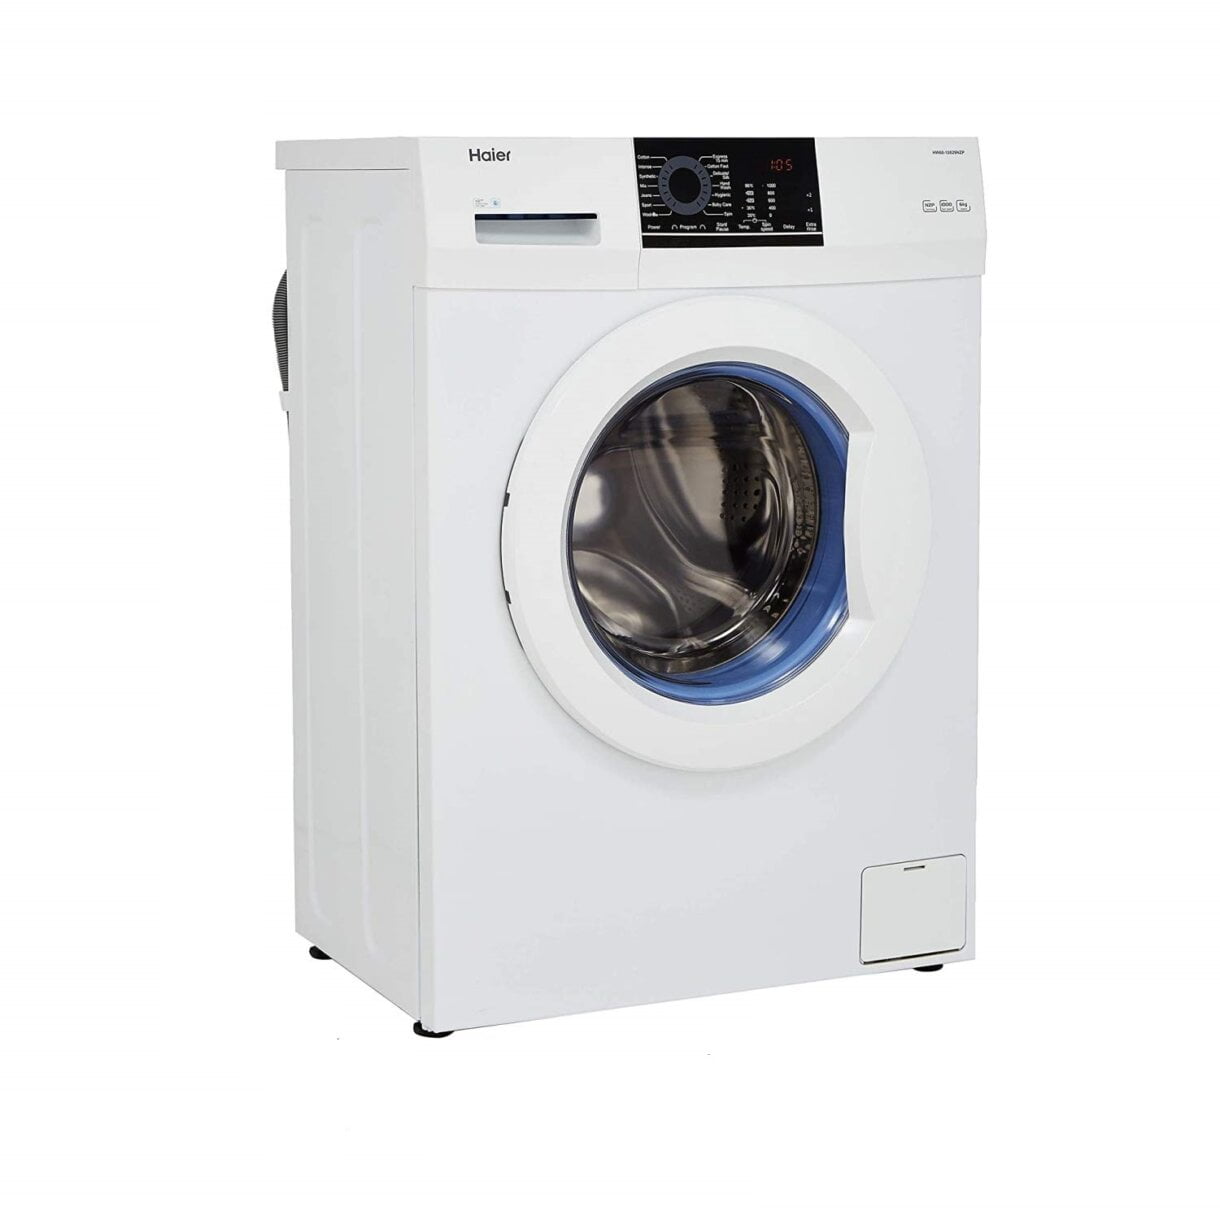 Haier 6 kg Fully-Automatic Front Loading Washing Machine with Muscular Drum, LED Display (HW60-10829NZP, White)